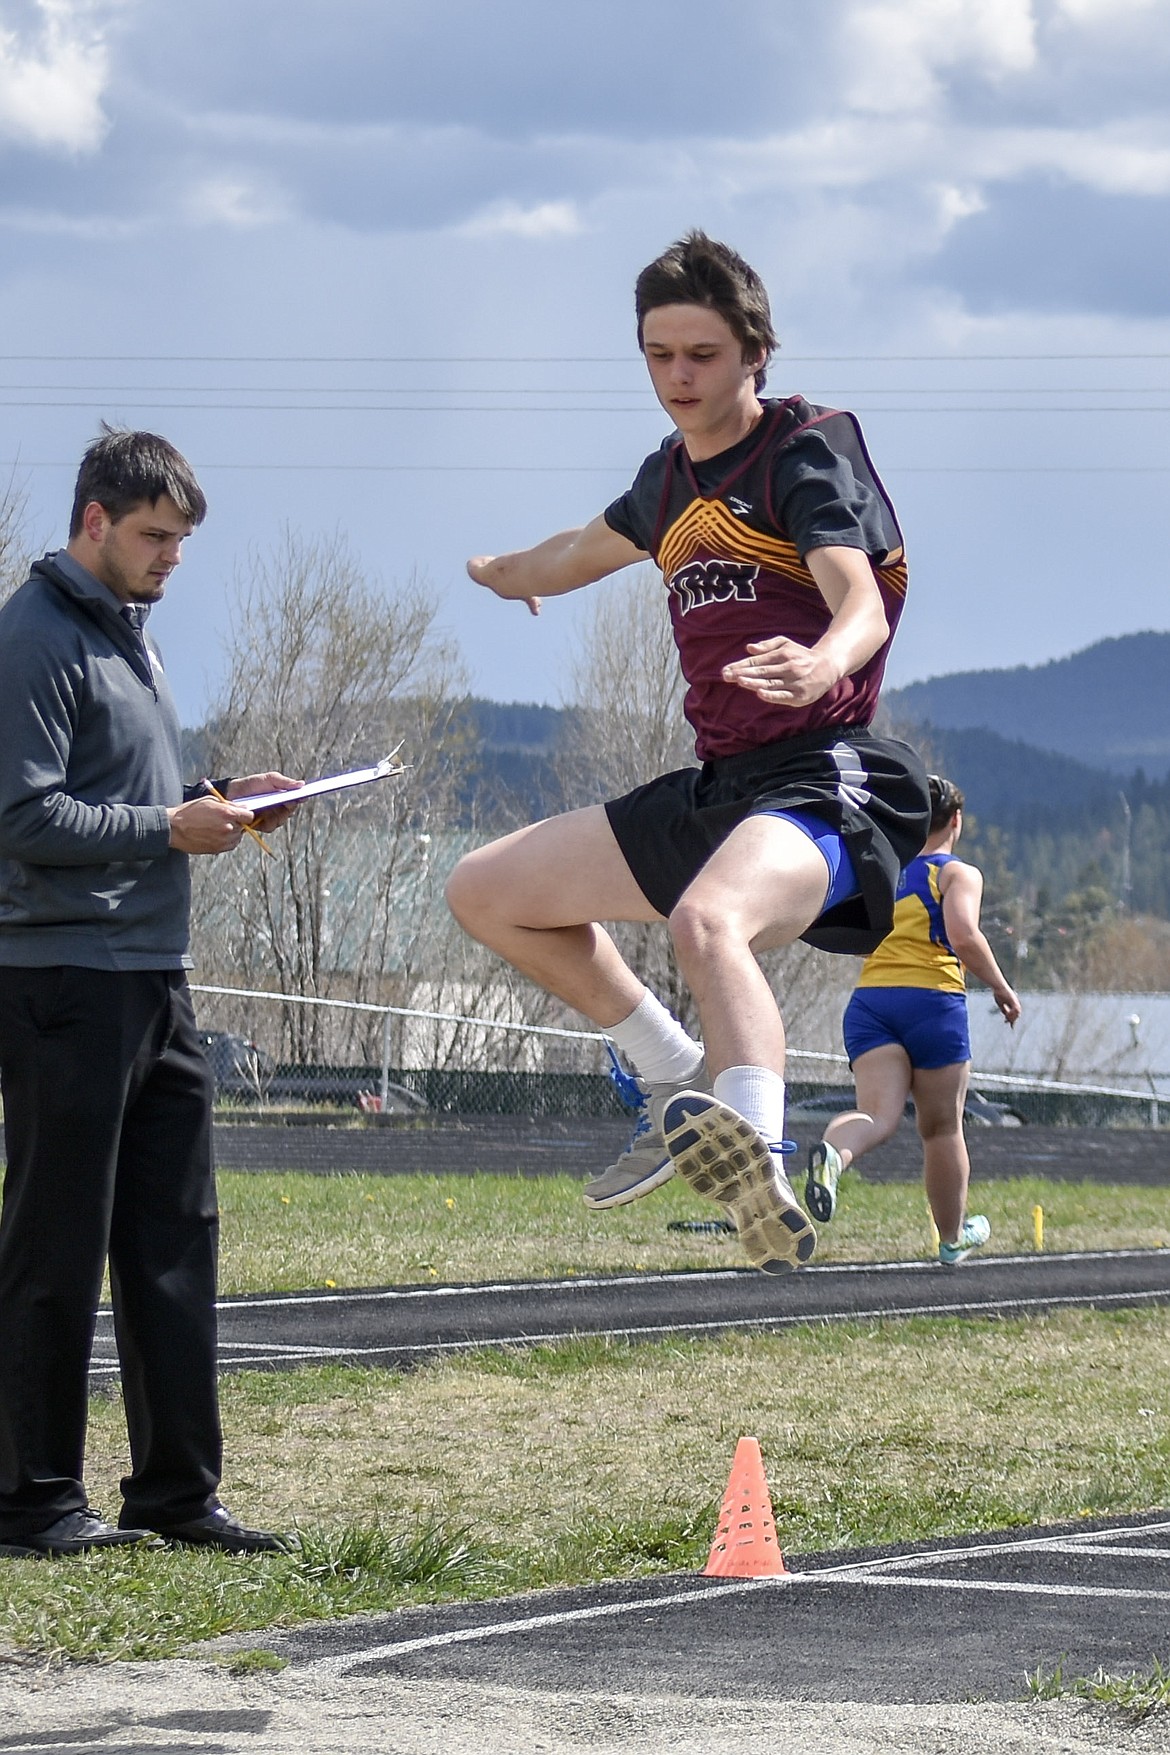 Troy sophomore Brodie Gravier competes in the long jump at the Lincoln County Track Meet Tuesday. (Benjamin Kibbey/The Western News)